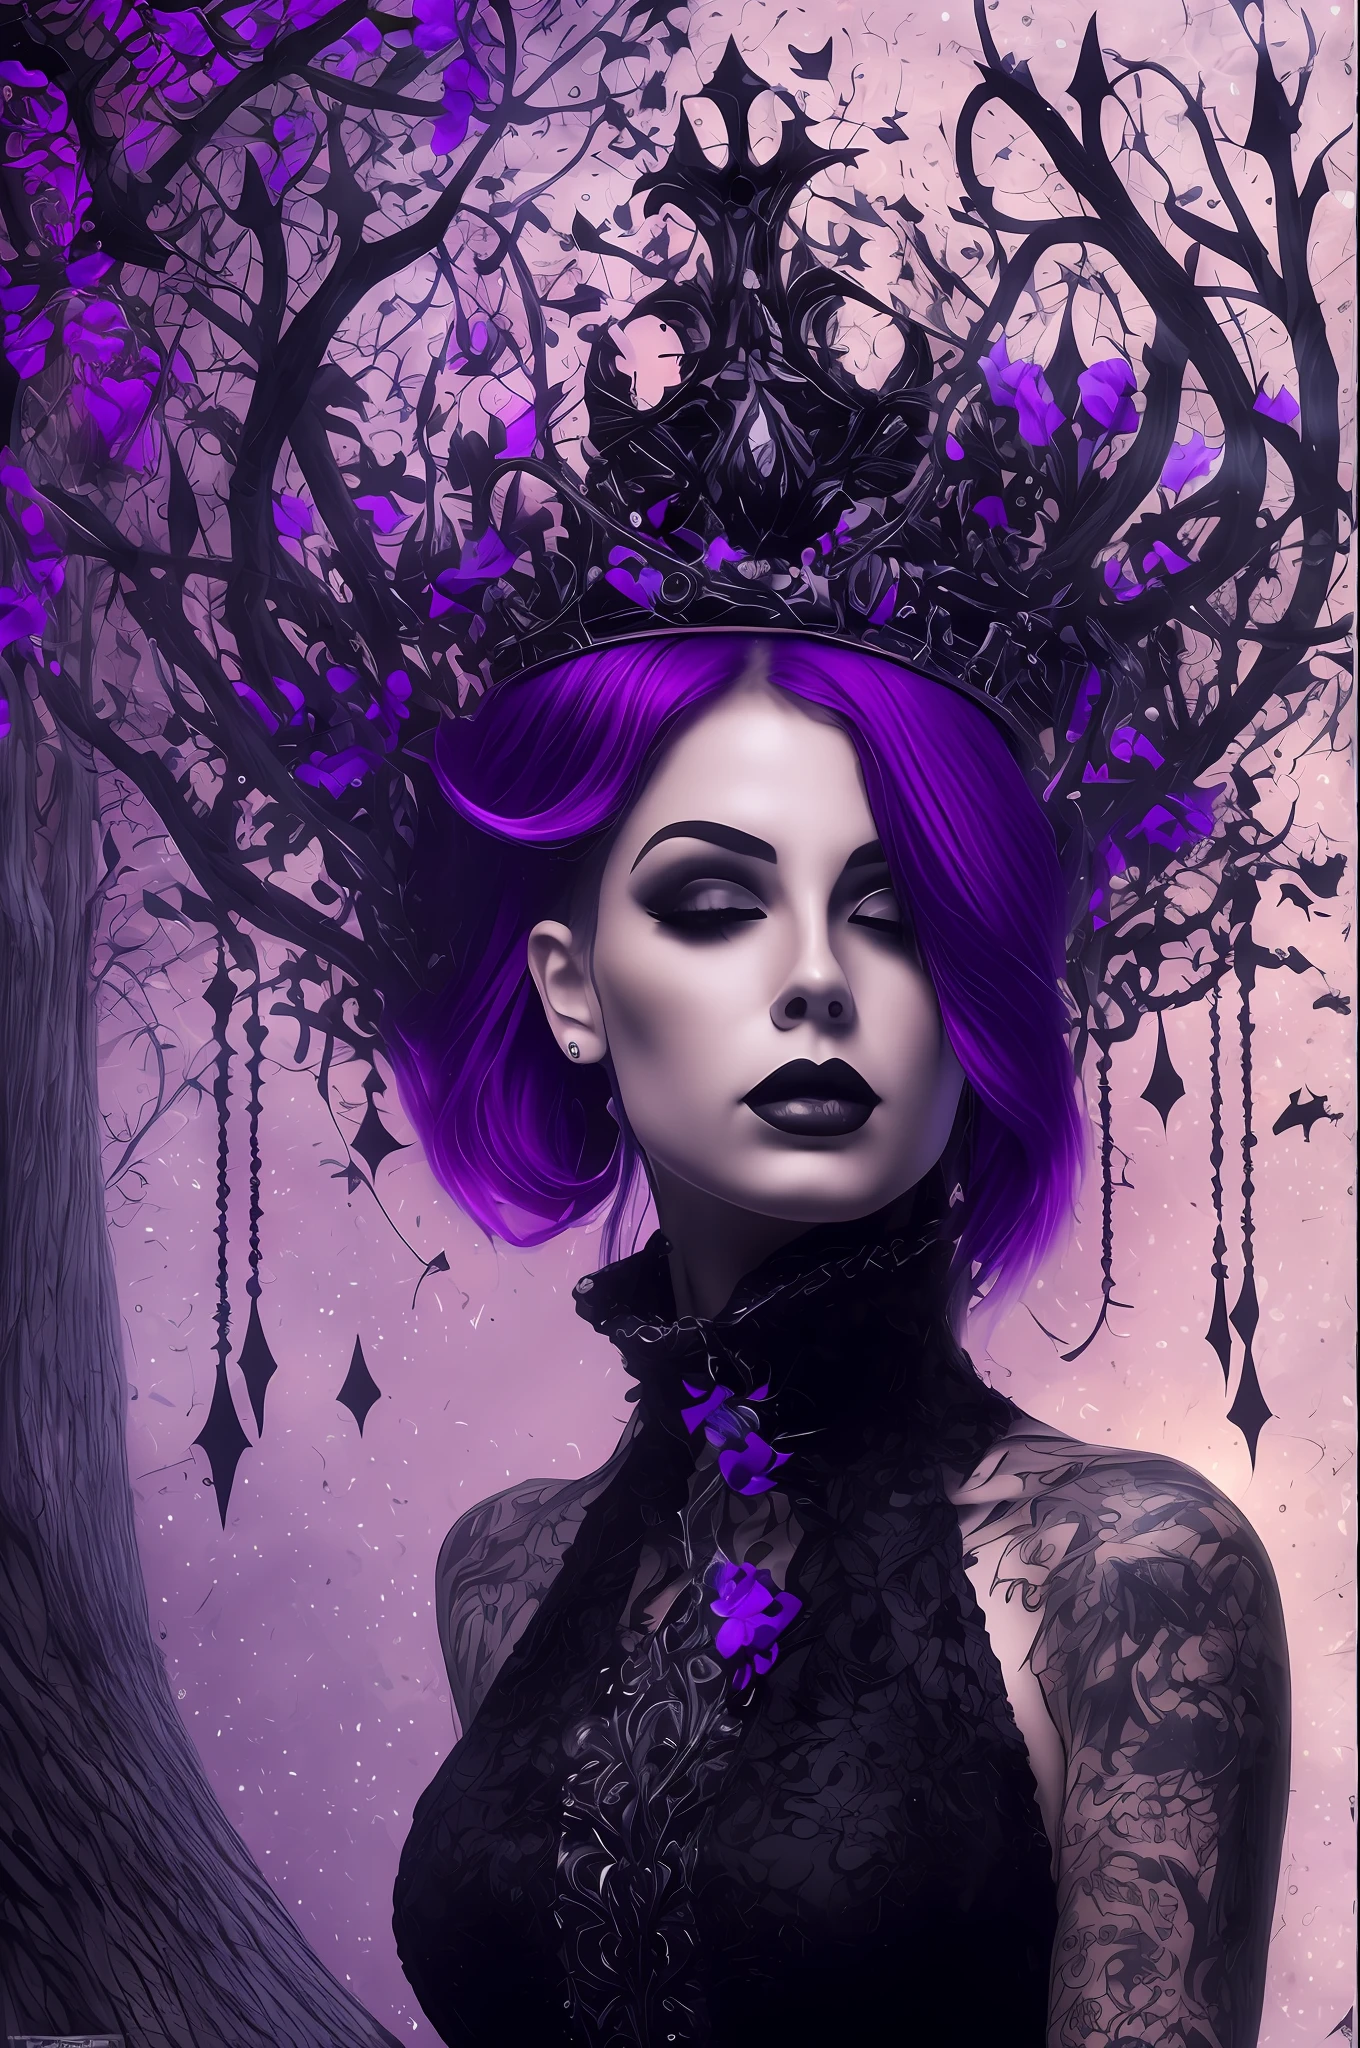 beautiful tattooed woman, short black hair, fully body, Gothic purple and black dress, black reindeer gloves, On his neck a crown of void, Gothic, very beautiful, highest quallity, 8k, in the background a dark forest, with illuminated butterflies